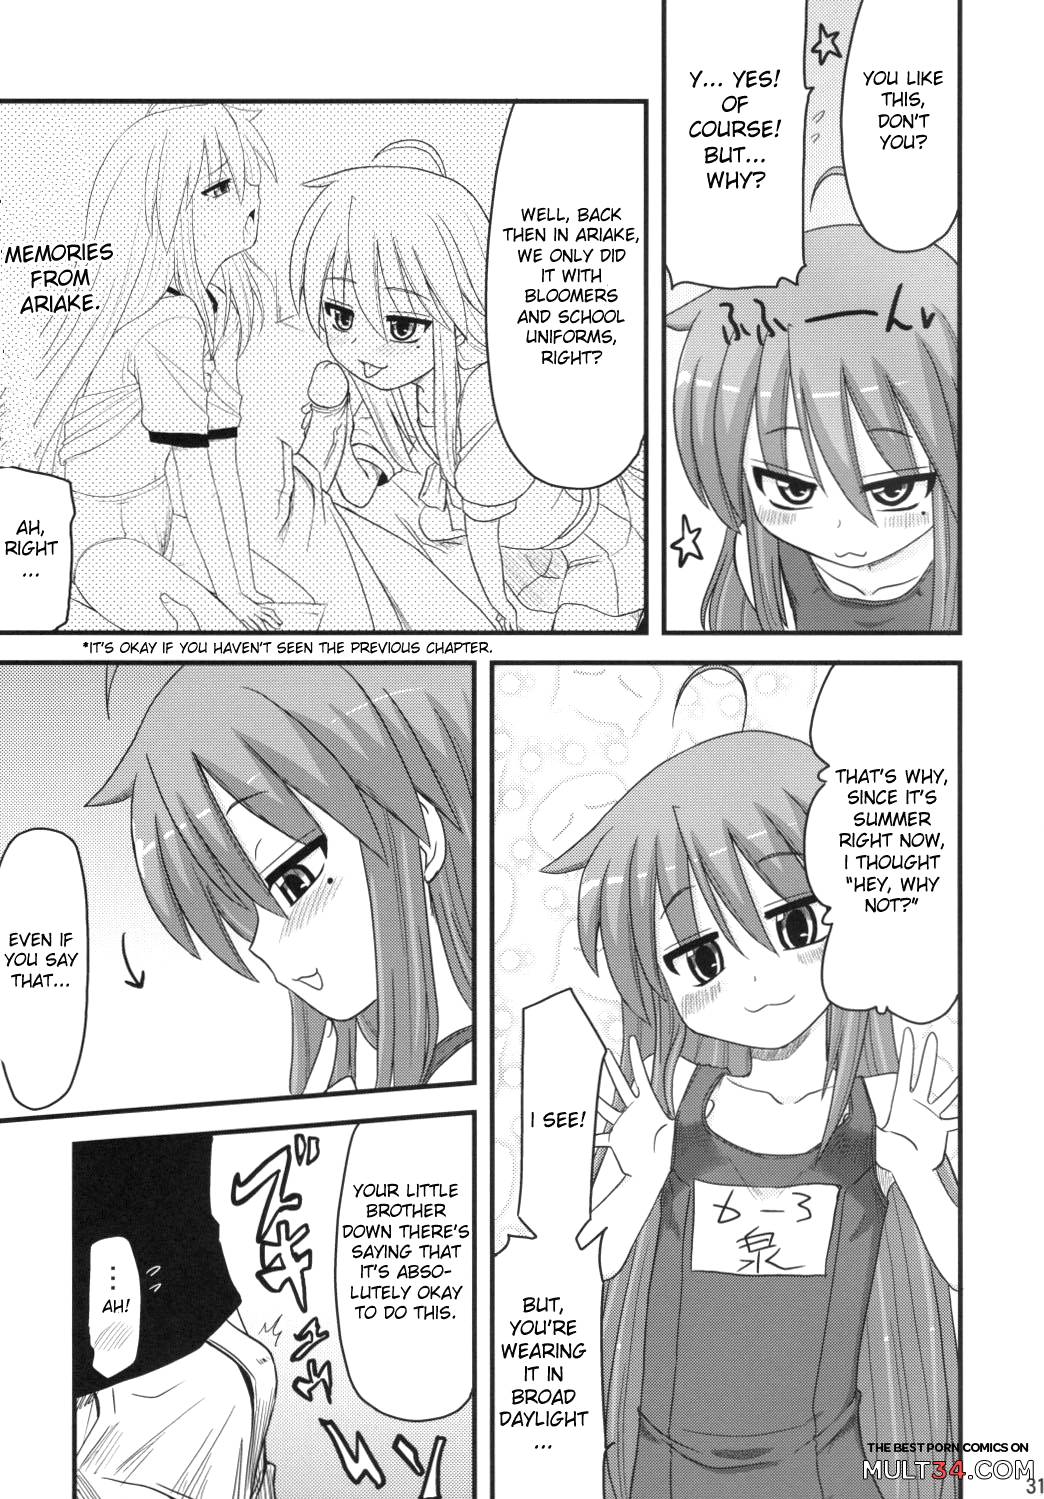 Konata and Oh-zu 4 people each and every one + 1 page 27